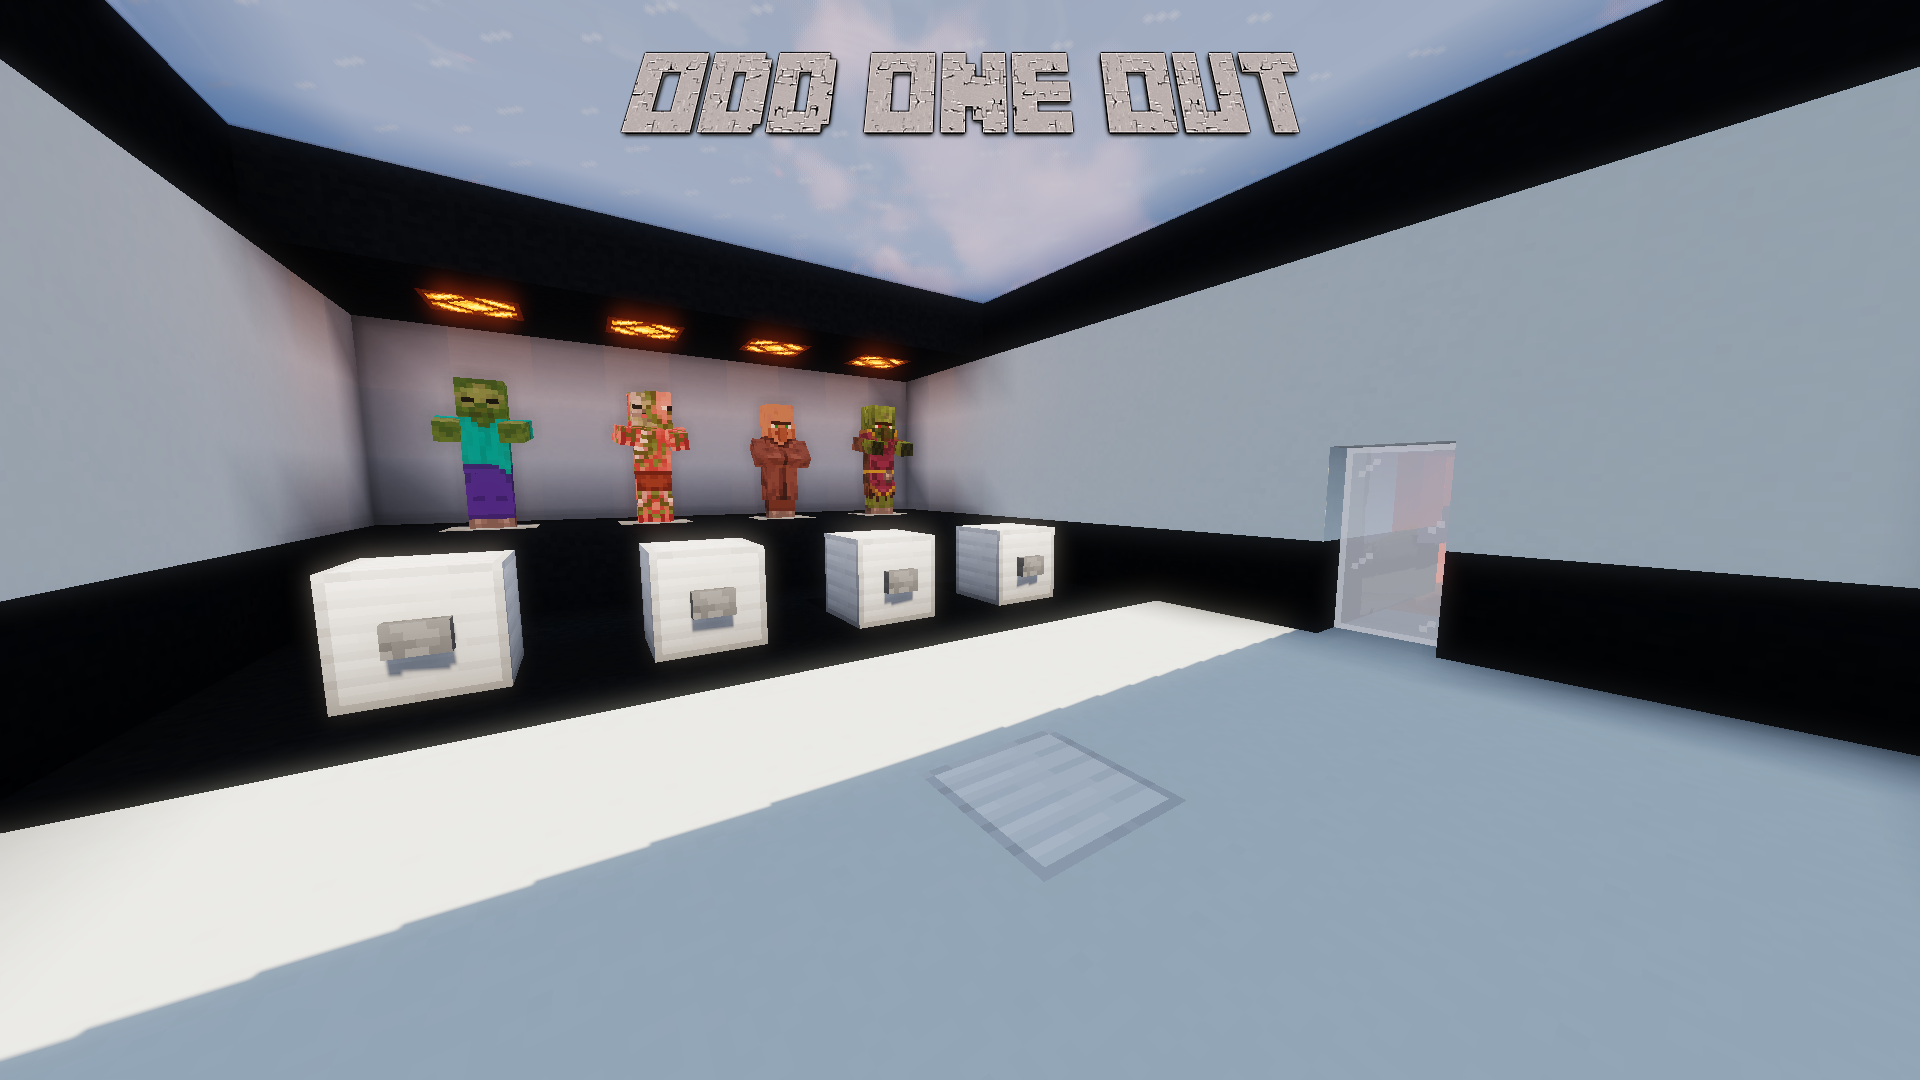 Download The Odd One Out for Minecraft 1.14.4